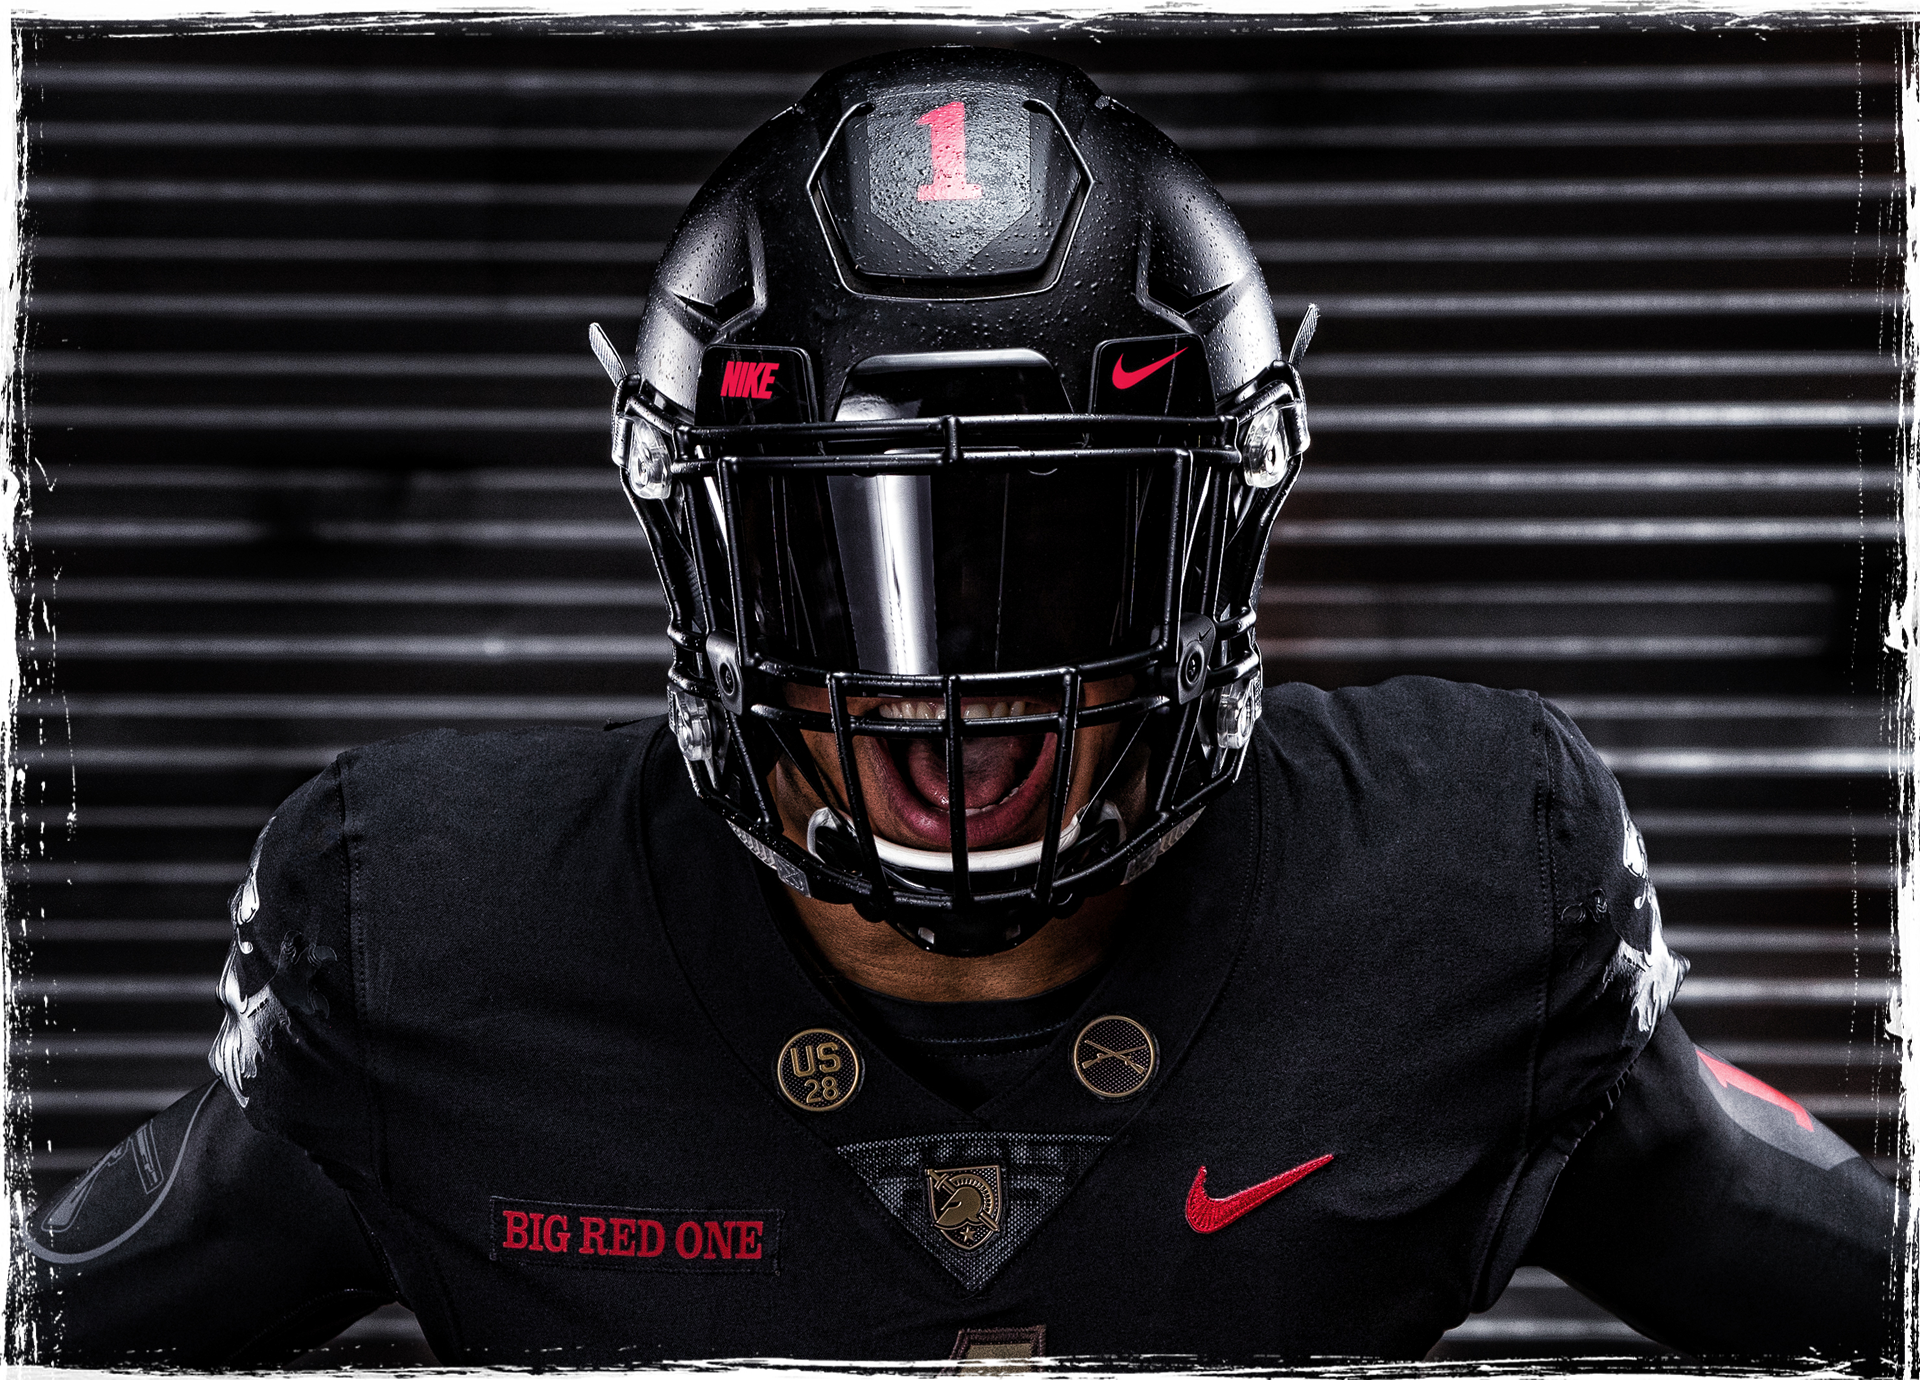 army big red one jersey